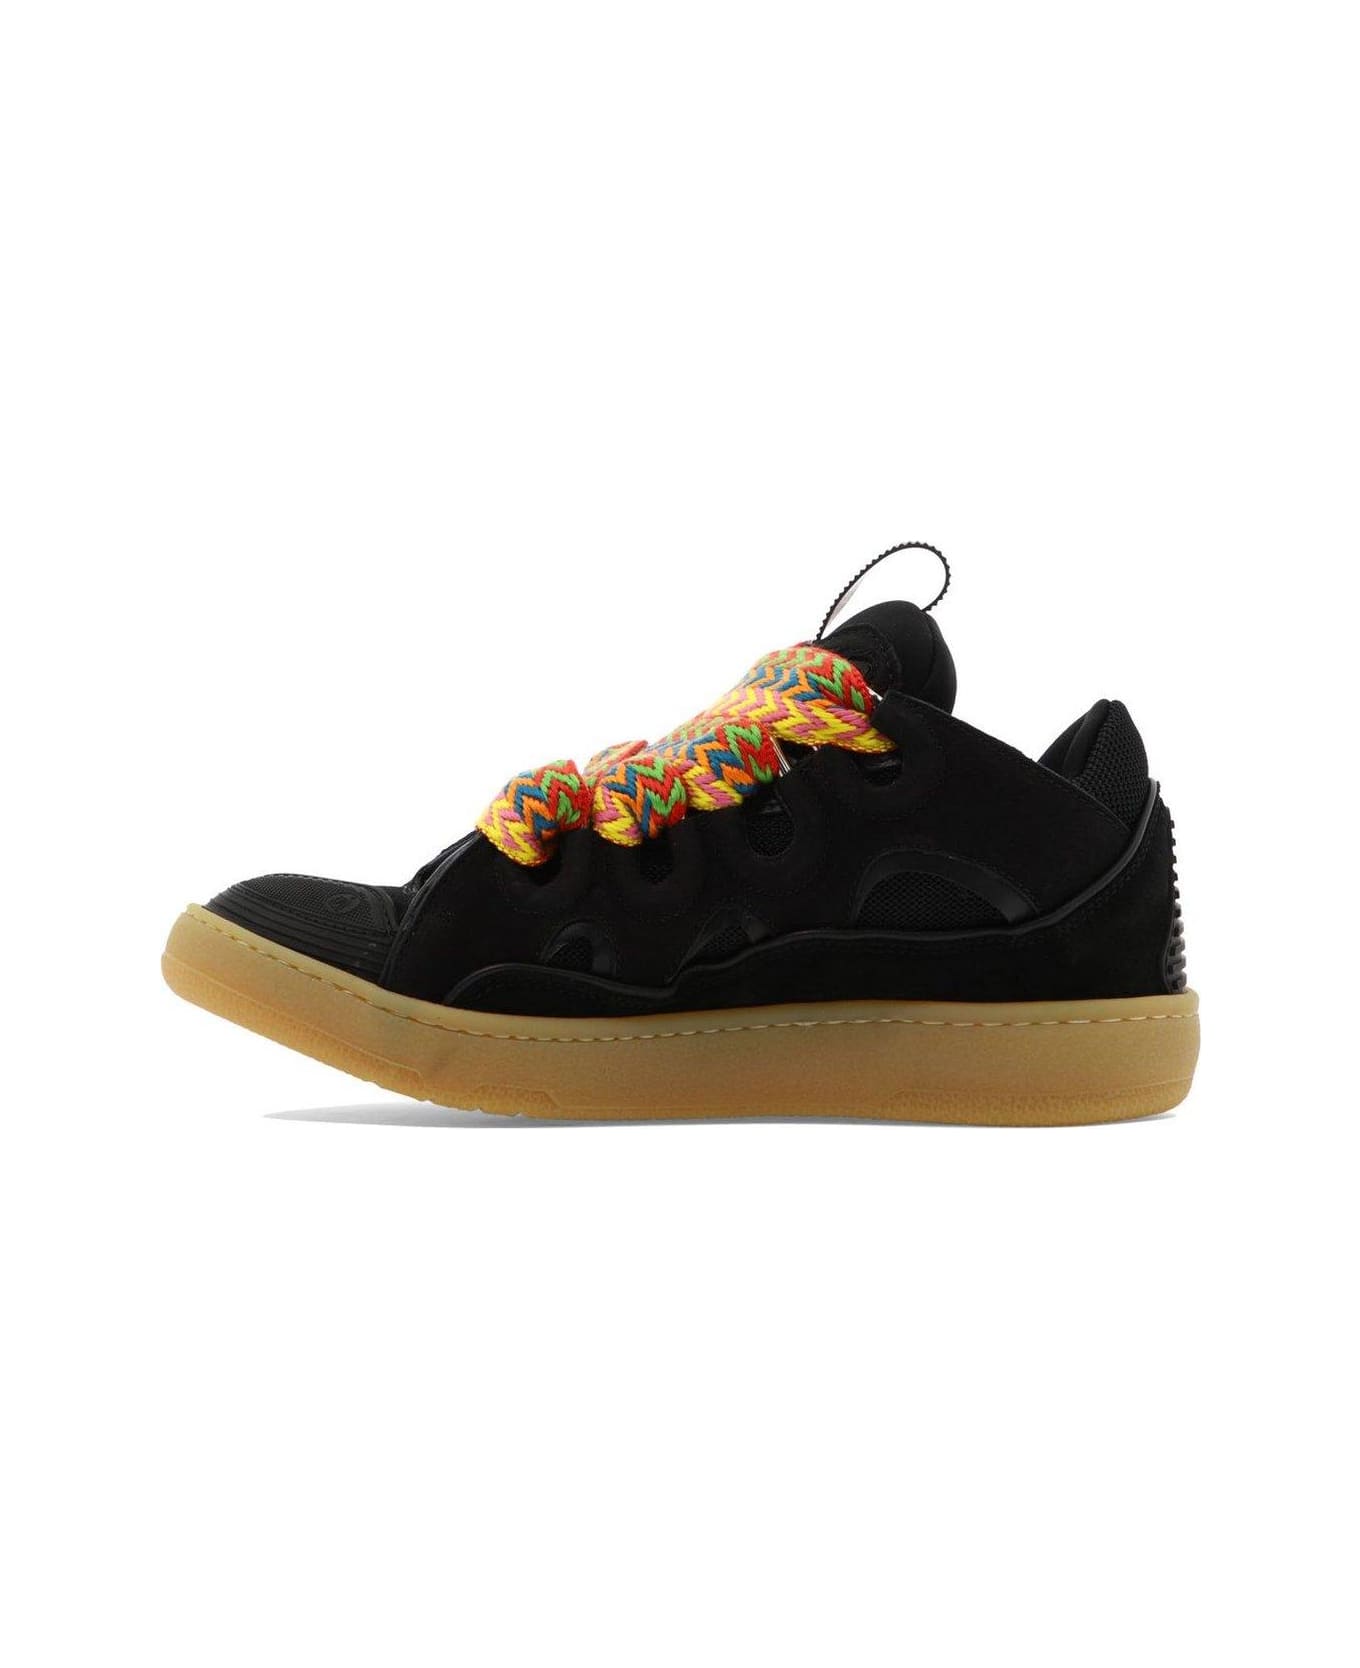 Lanvin Curb Panelled Lace-up Sneakers - Black